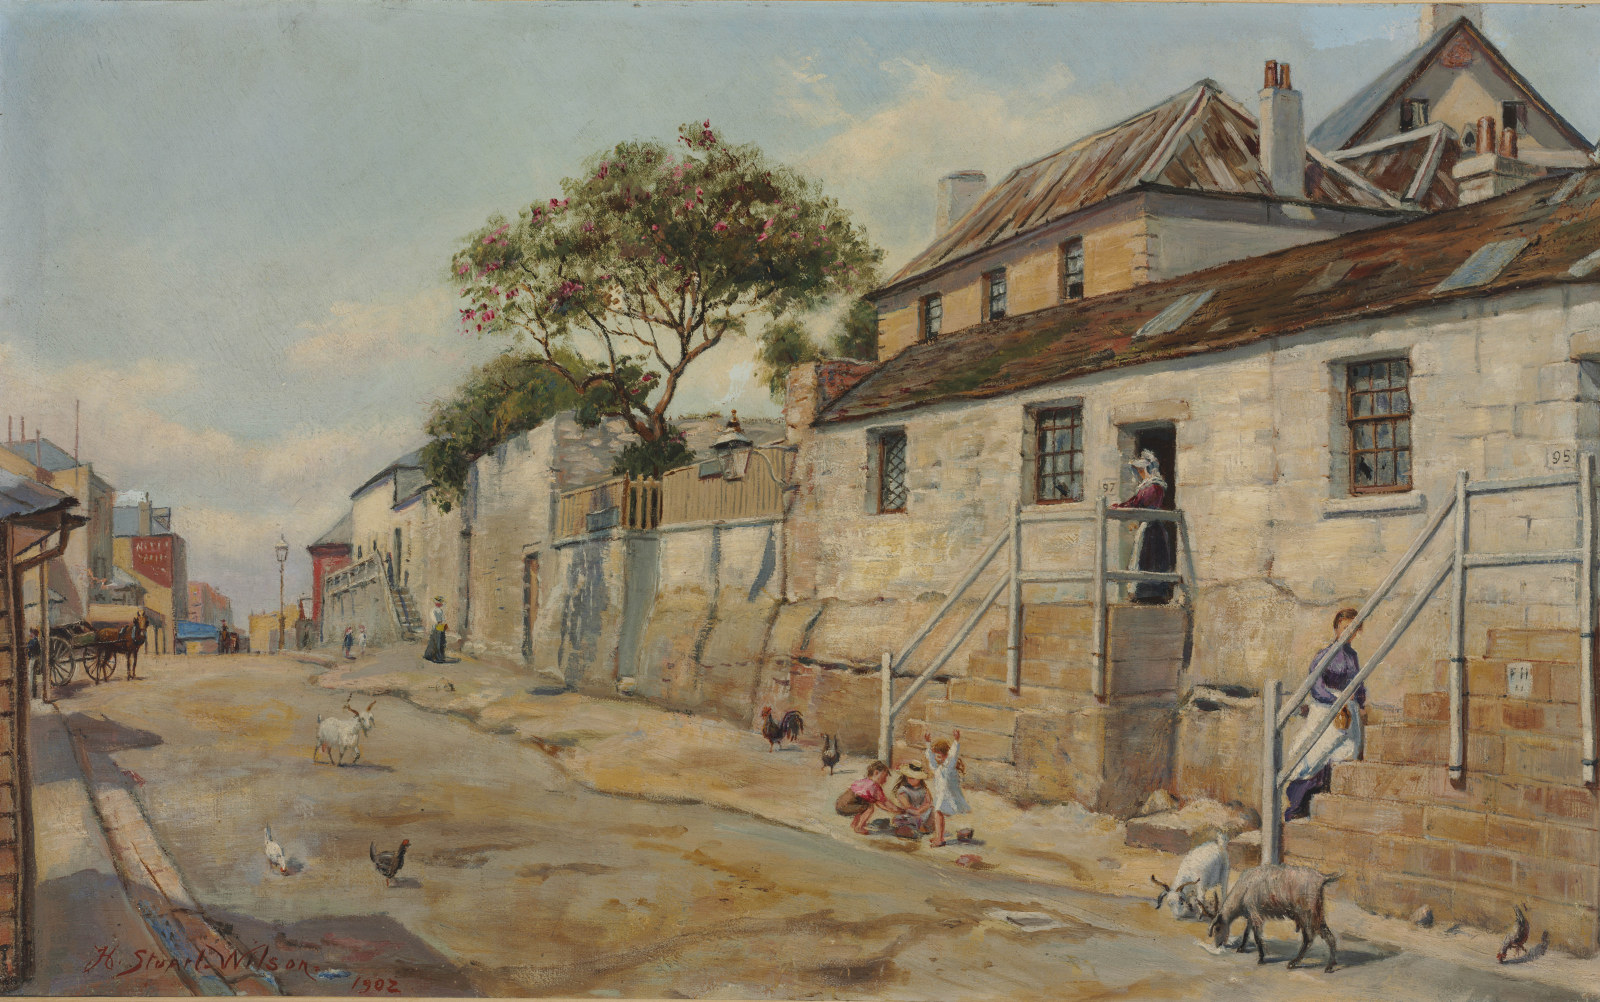 Painting of street scene showing row of cottages on sandstone base above the street with timber steps to their front doors. Women sit on the front steps and goats meander the street.